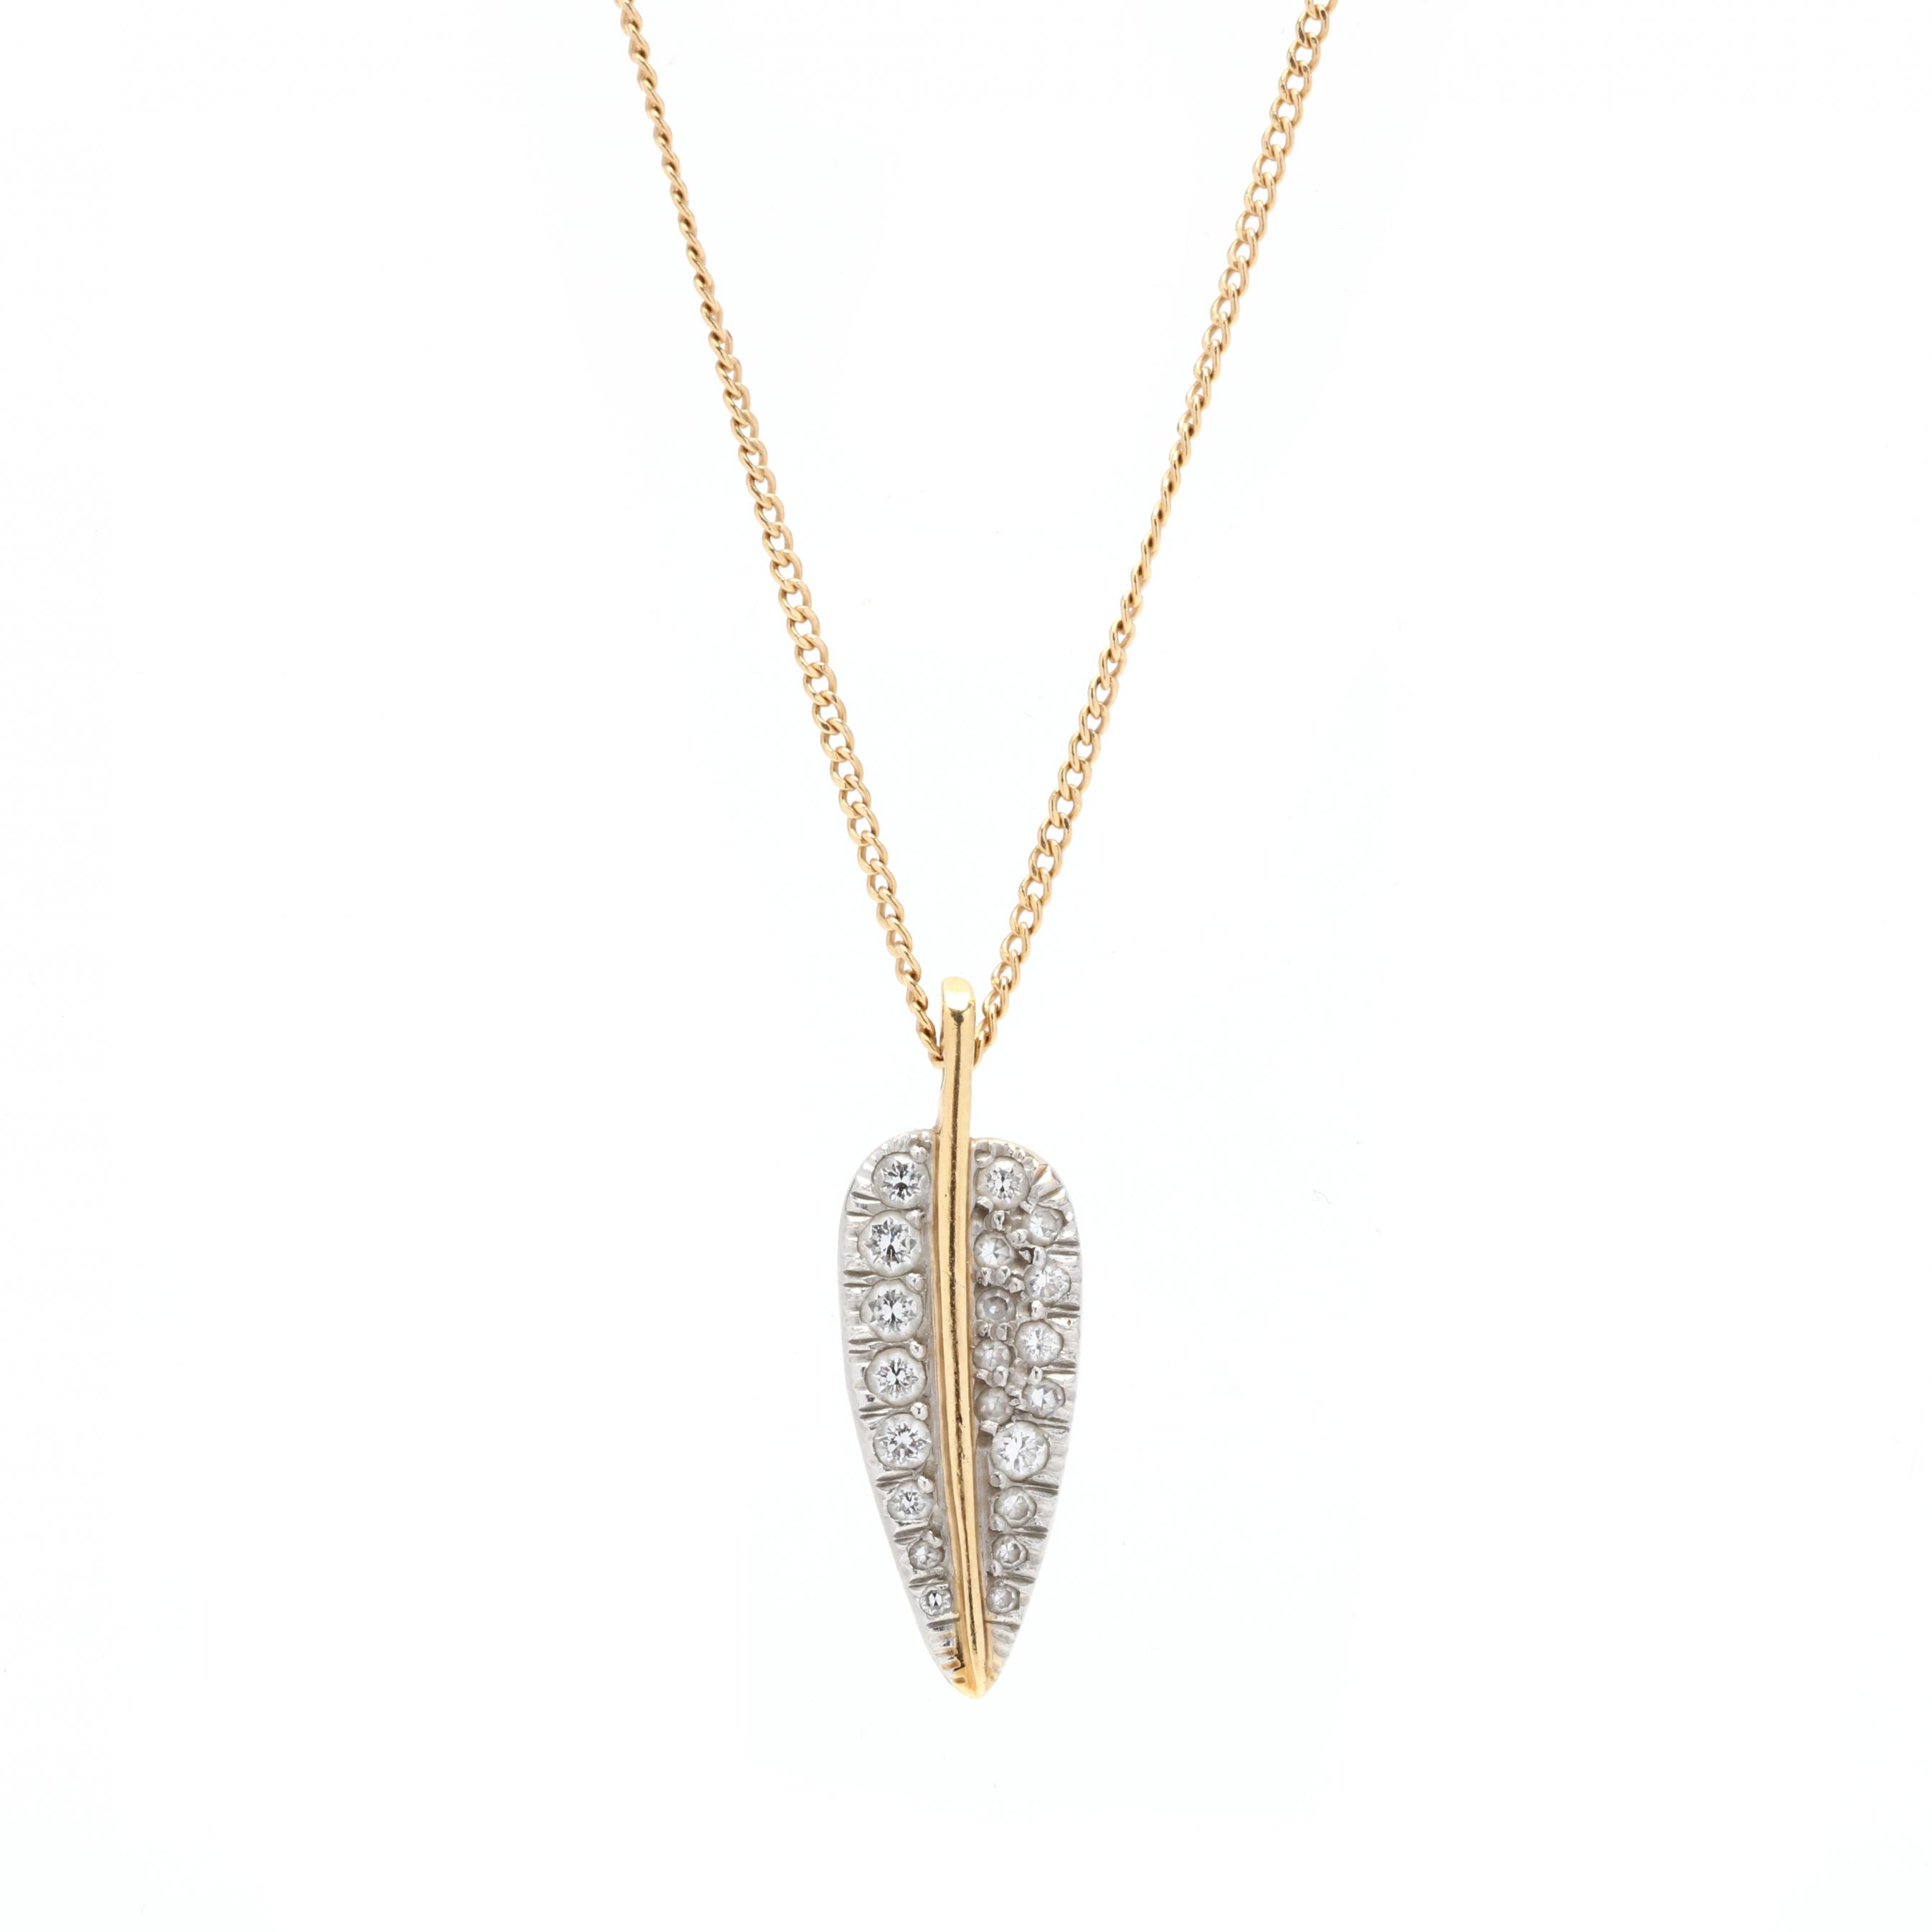 Diamond Feather Necklace 14K Yellow Gold Pendant Natural Round Cut 0.09 CT  | eBay